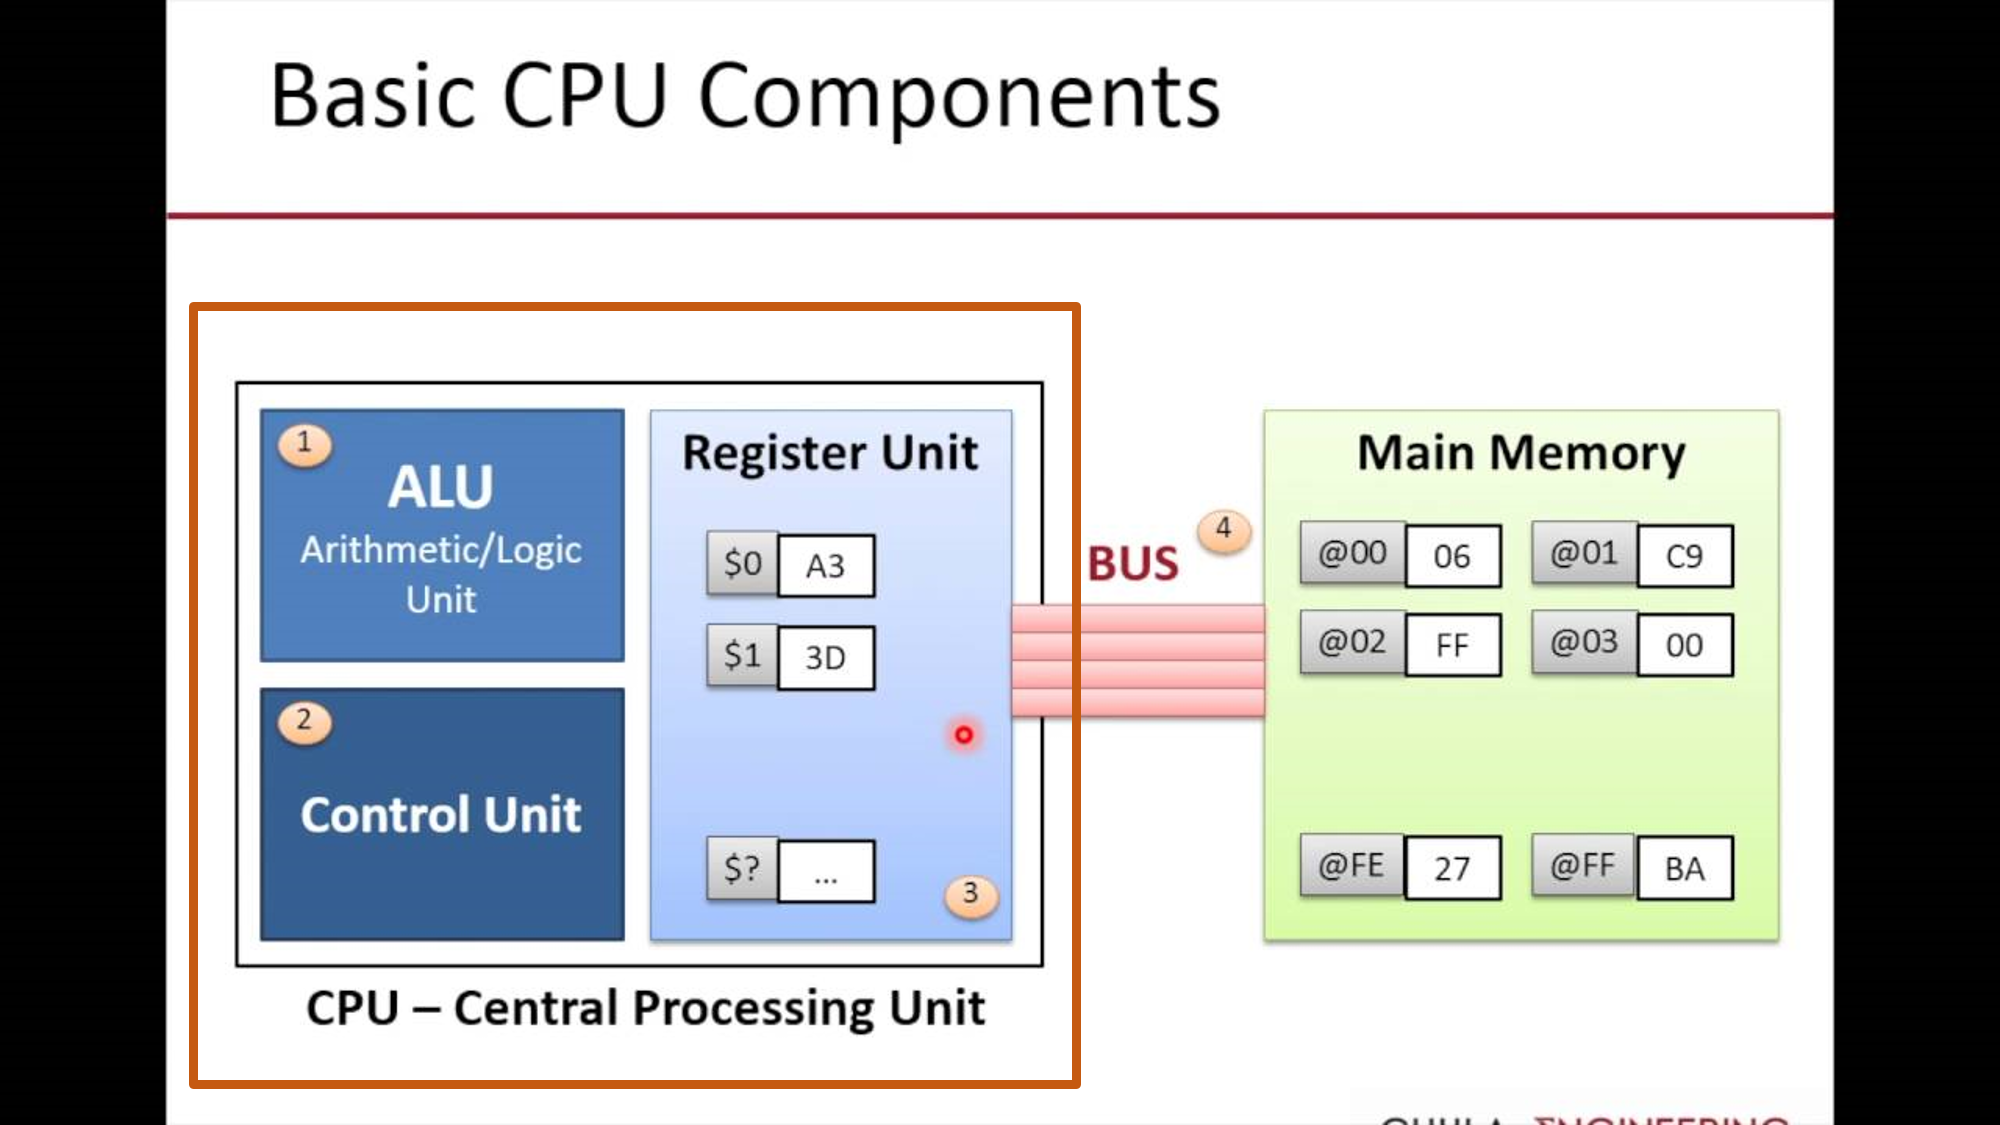 Components of CPU